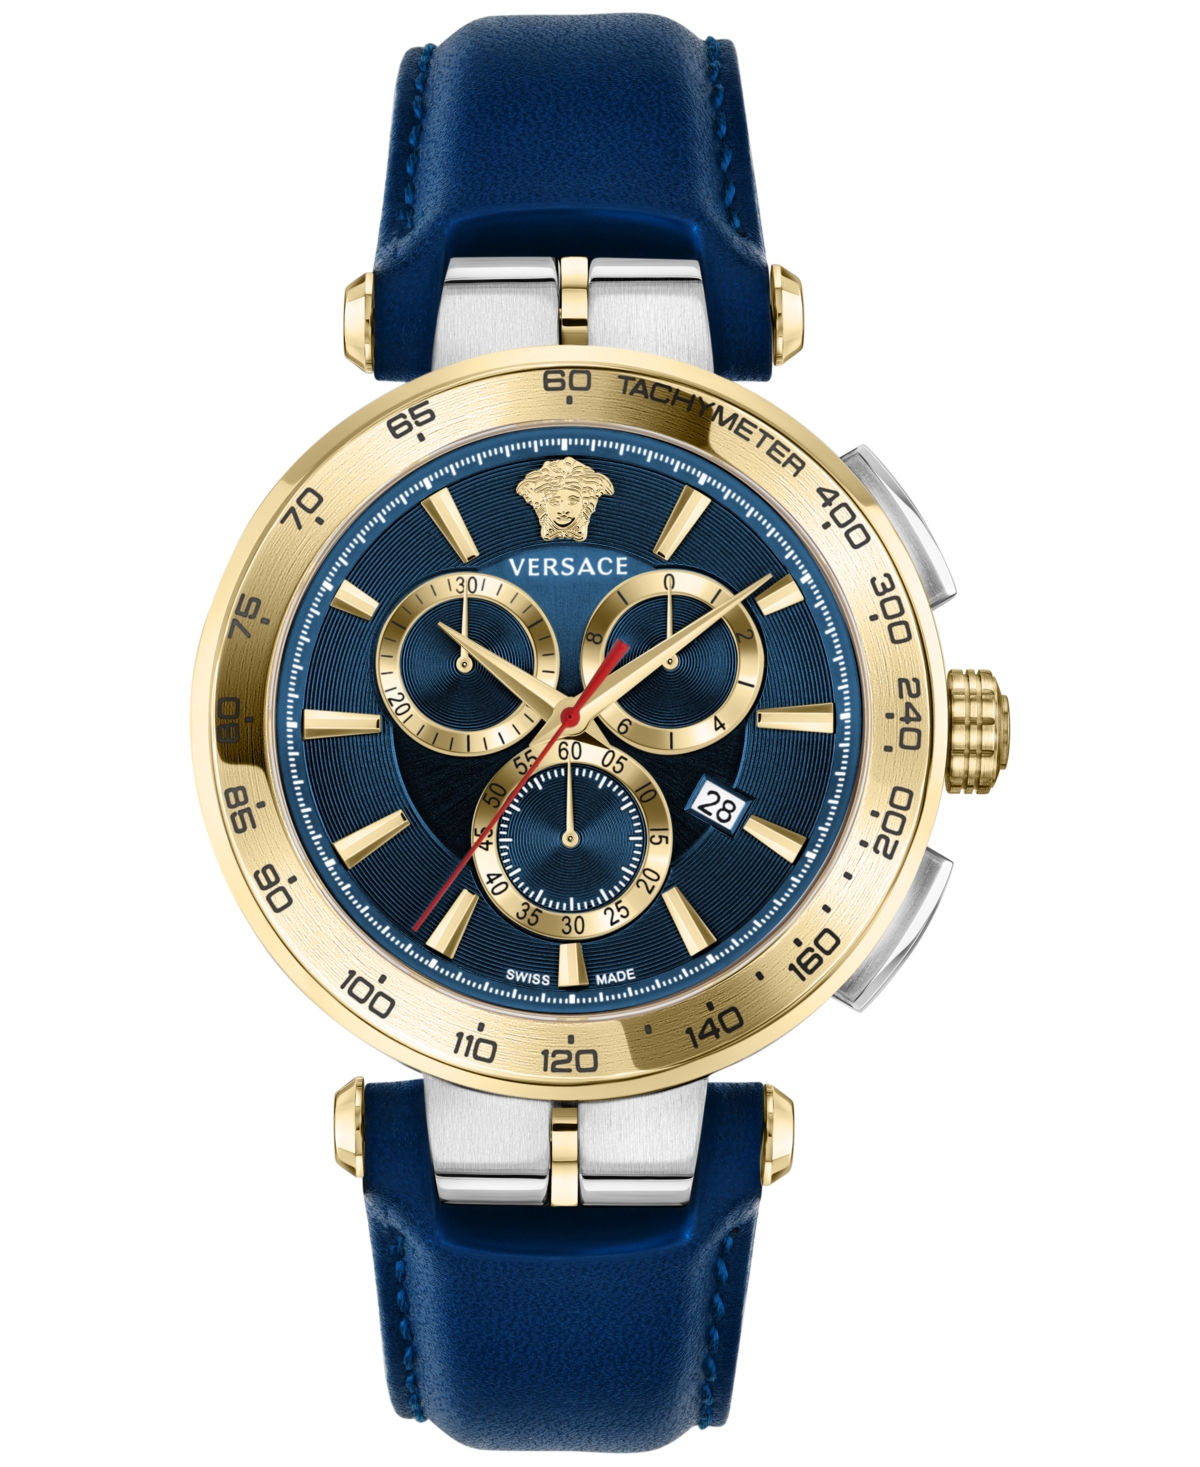 Versace Men's Swiss Chronograph Aion Blue Leather Strap Watch 45mm In Two Tone